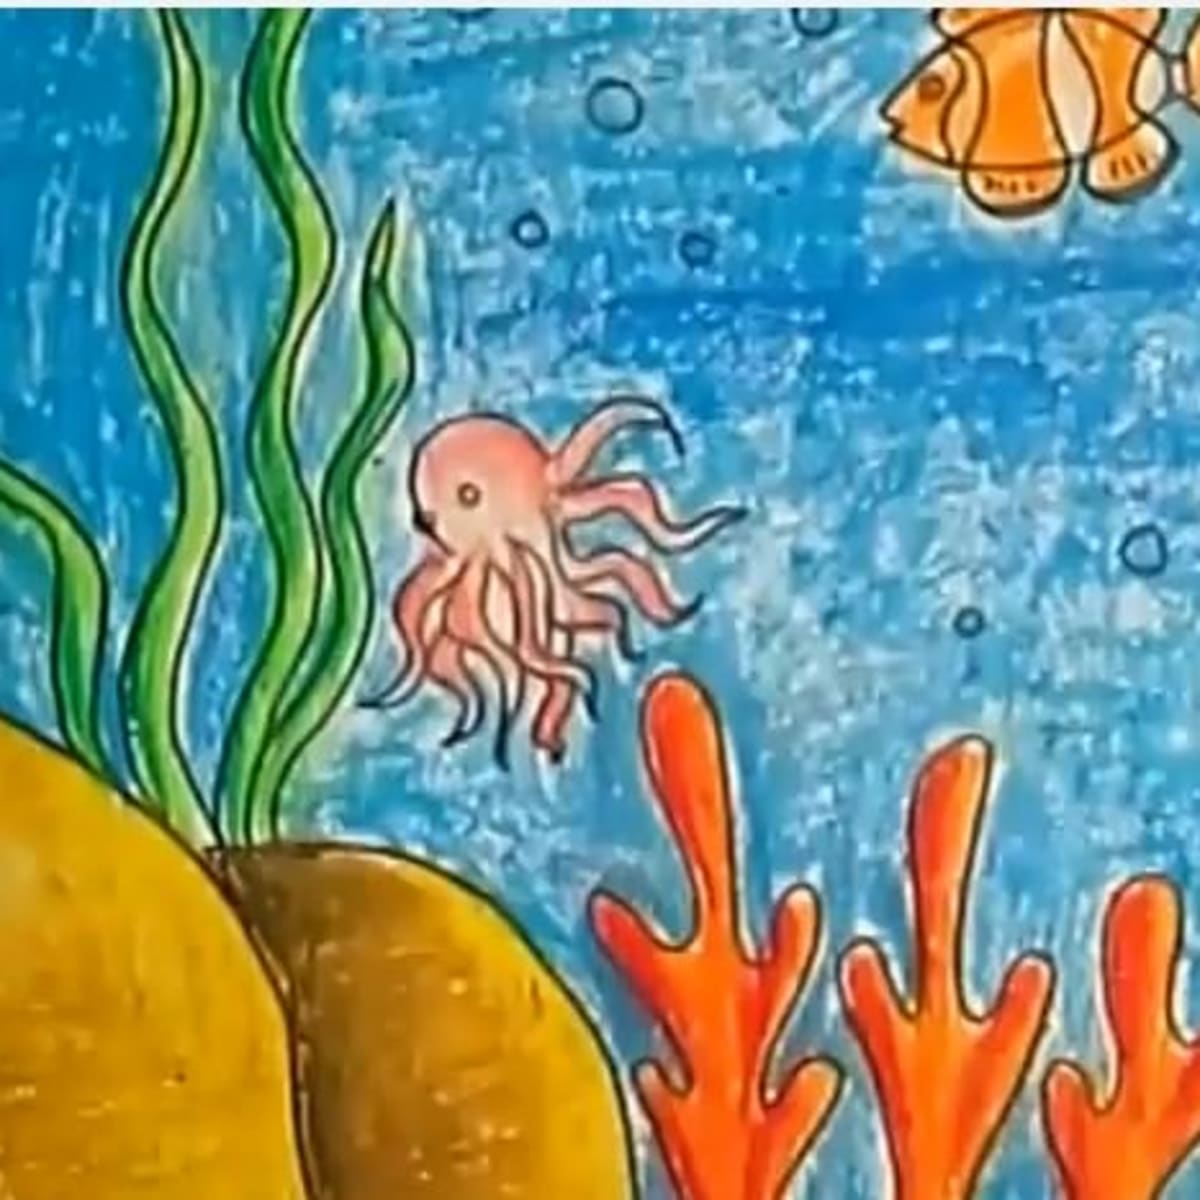 Children S Art How To Draw And Color An Underwater Scene Using Oil Pastels For Kids Feltmagnet